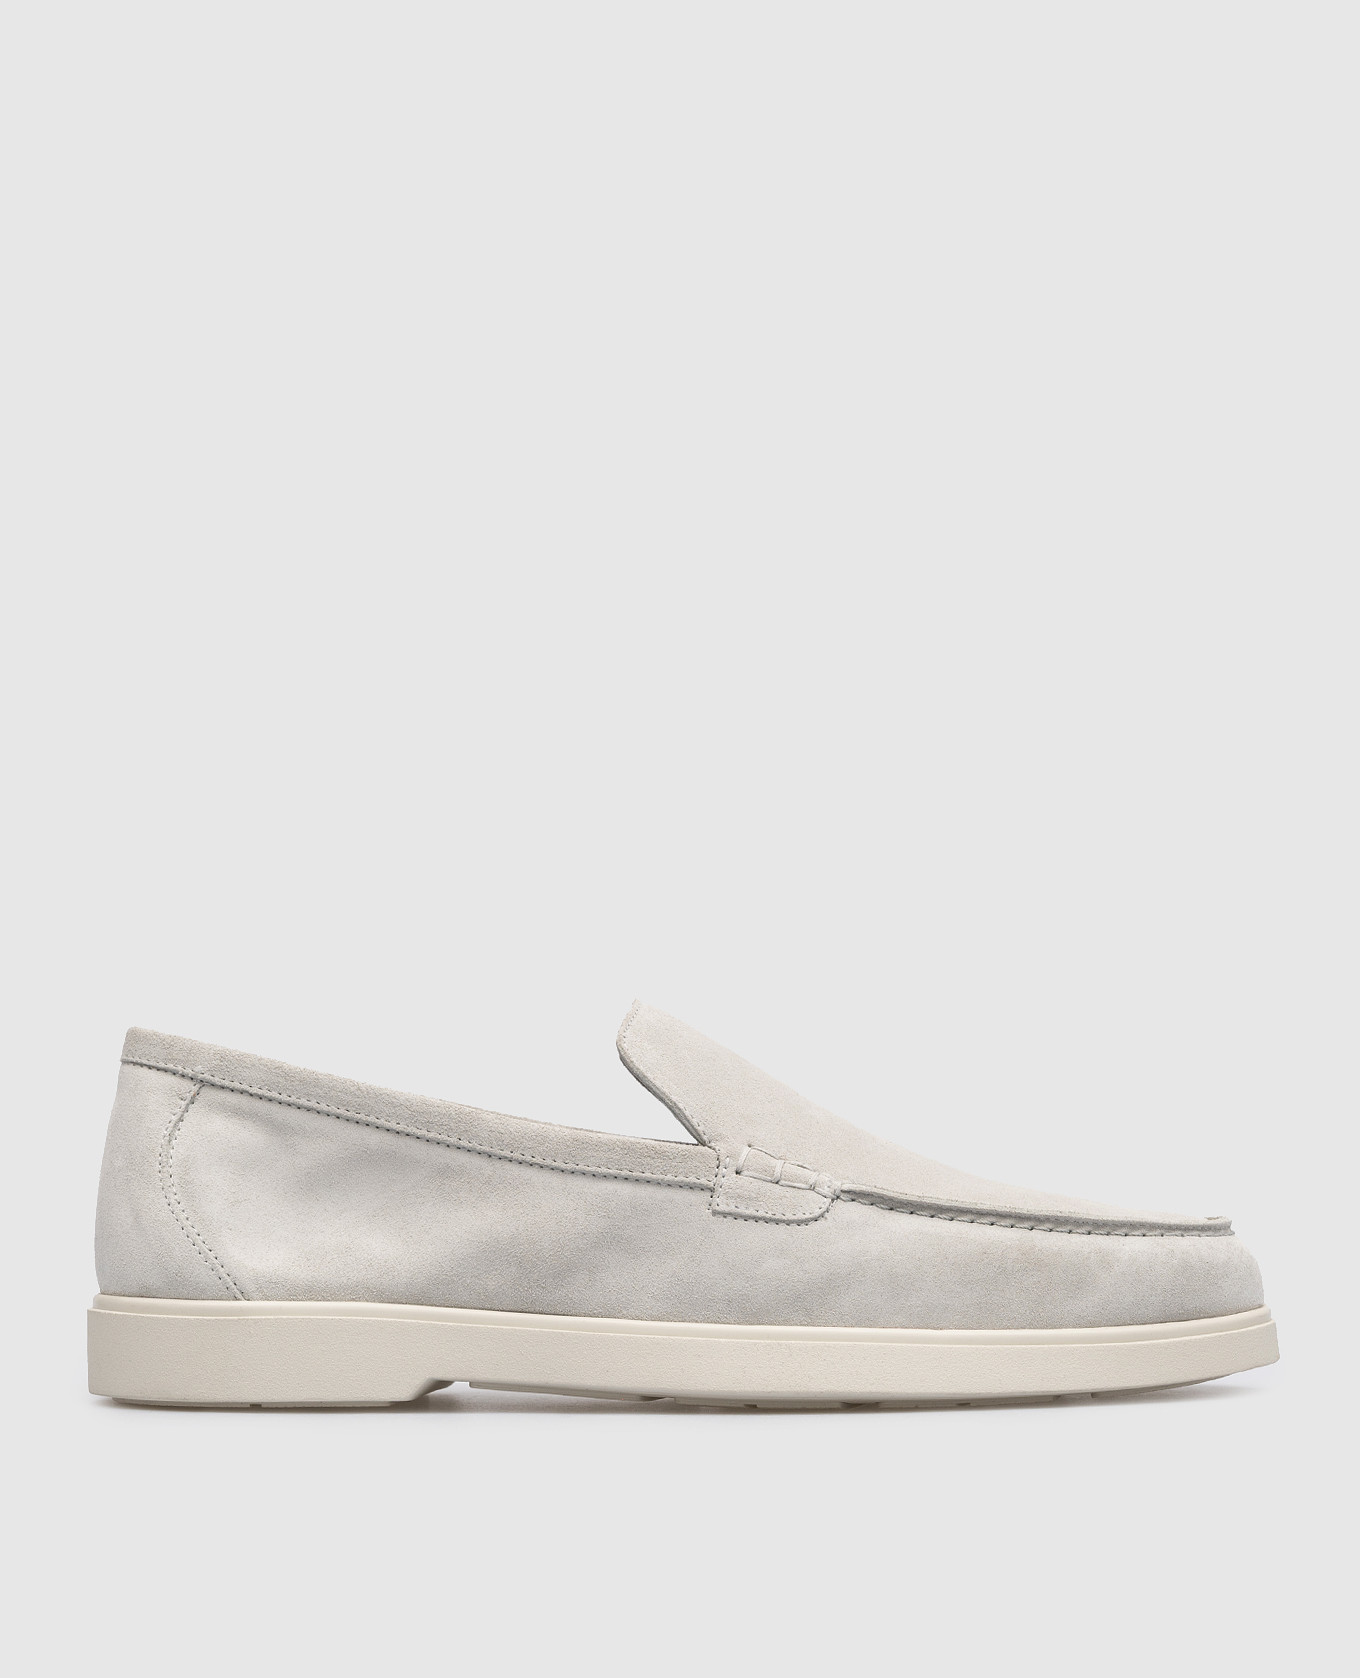 Cezanne gray suede slippers